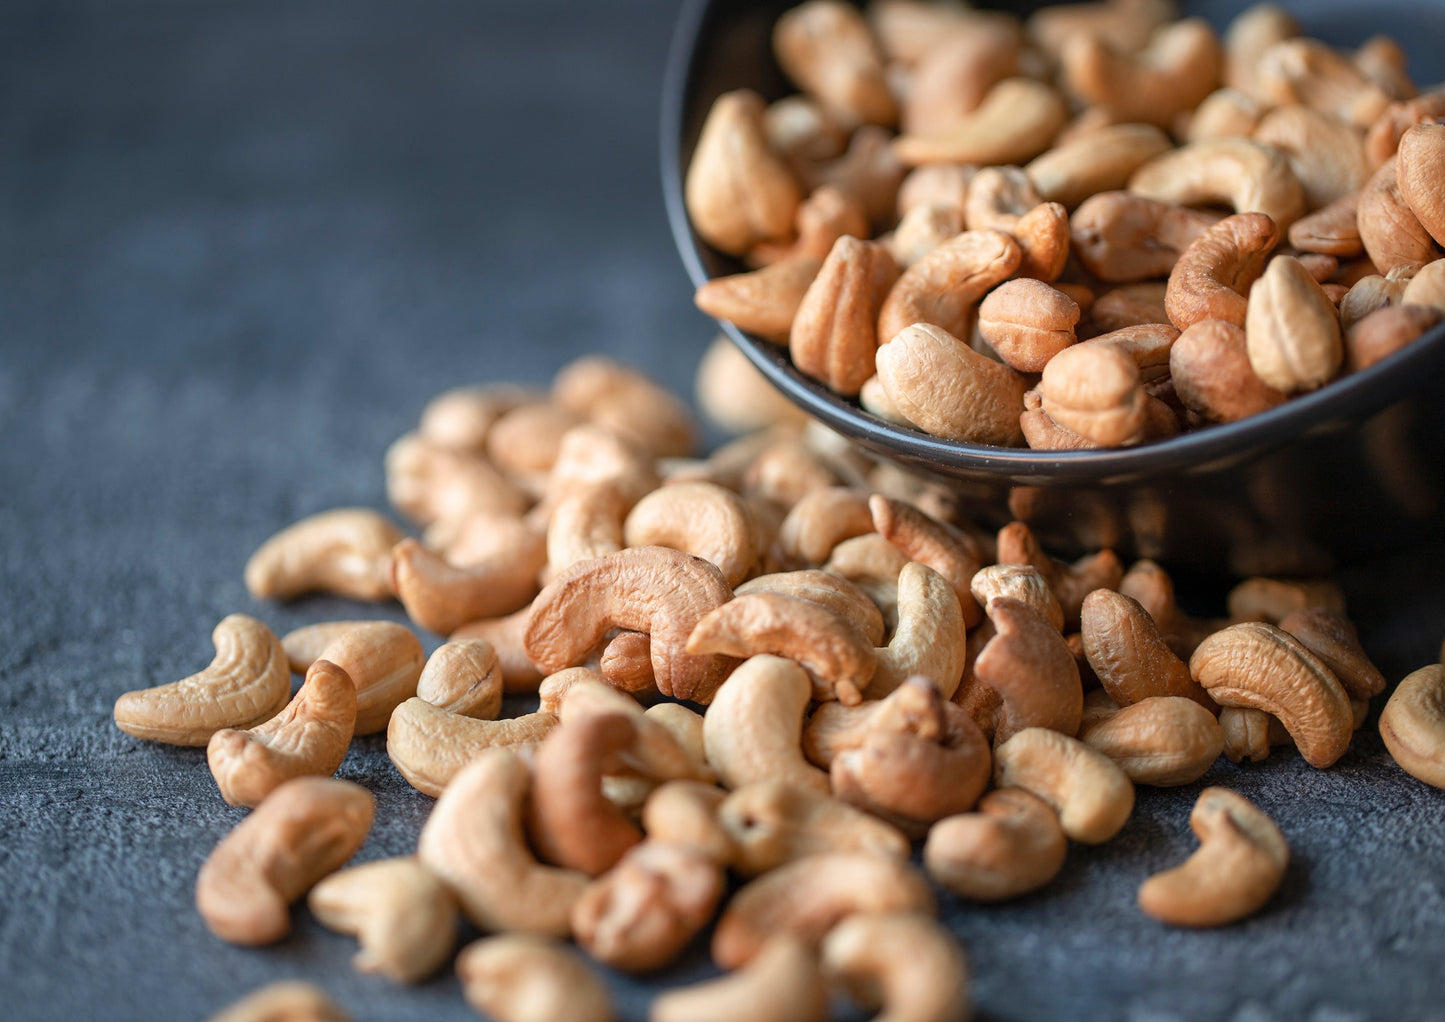 Organic Dry Roasted Whole Cashews with Himalayan Salt – Non-GMO, Oven Roasted and Lightly Salted Nuts, No Oil Added, Vegan, Kosher, Bulk. High in Protein. Great Wholesome and Crunchy Snack